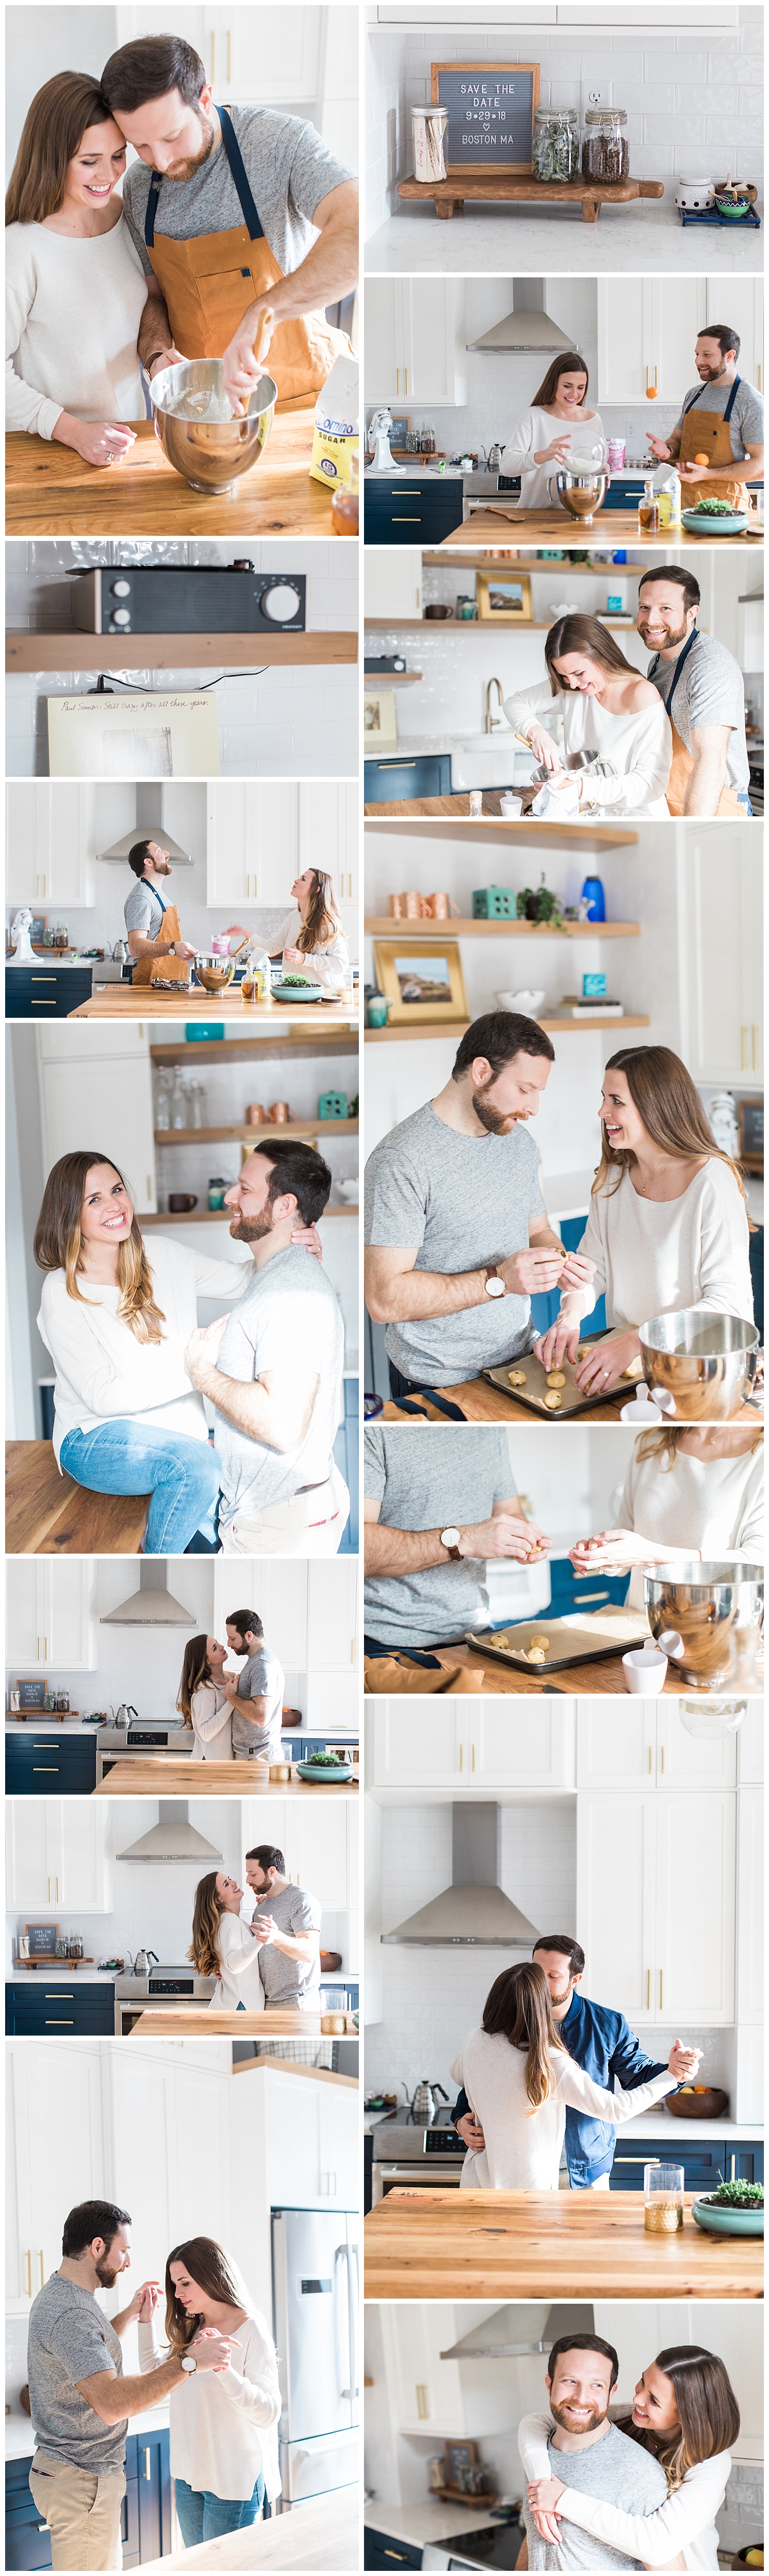 Lifestyle engagement session in the South End, Boston. Couple baking cookies and photography by halie.